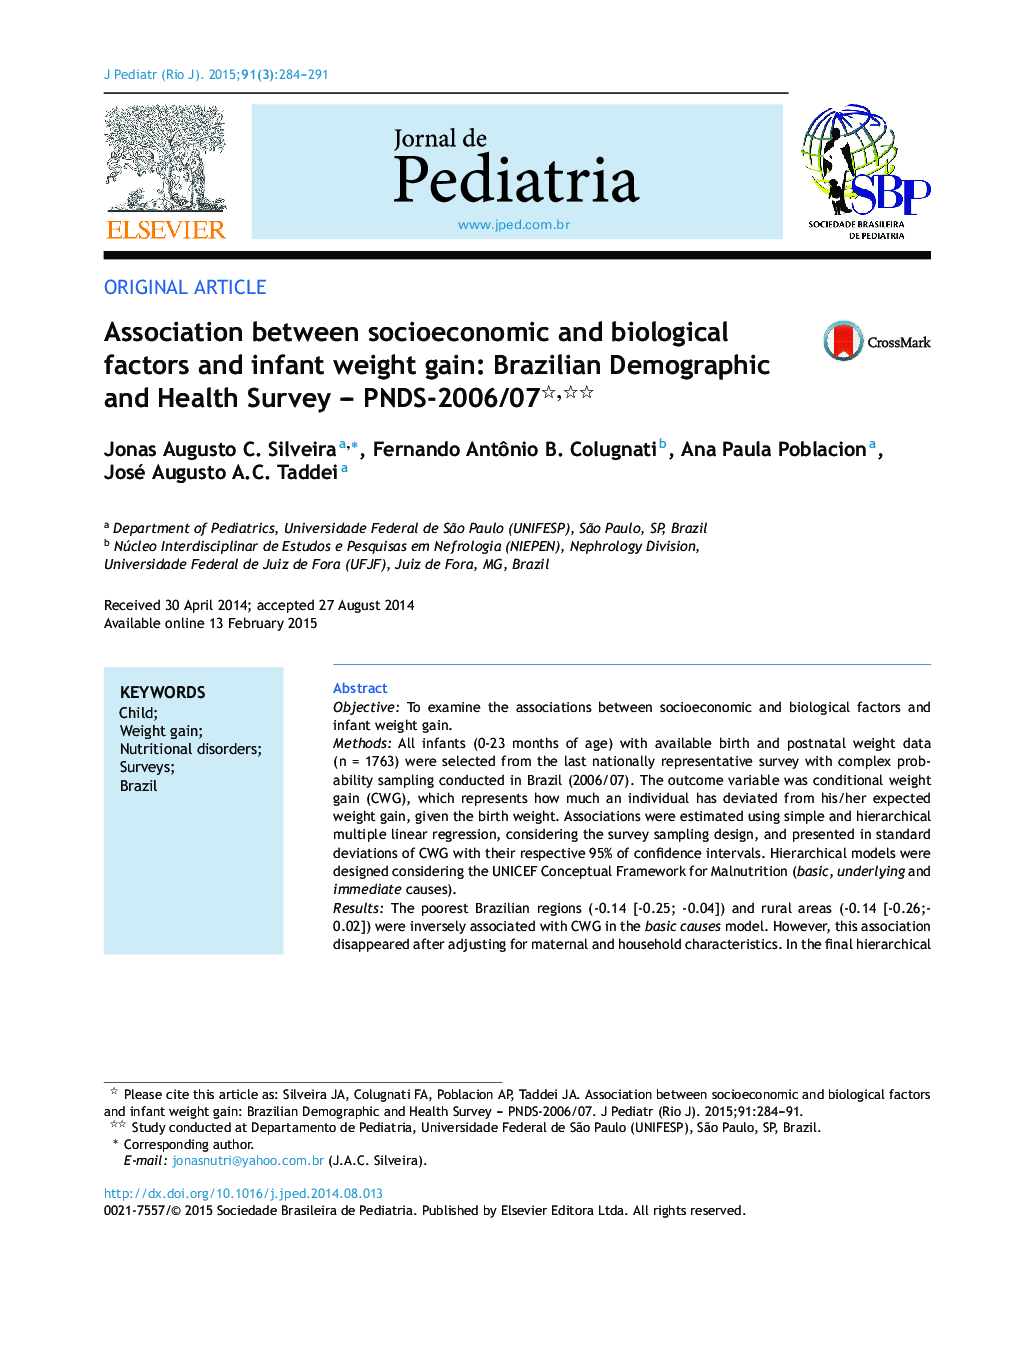 Association between socioeconomic and biological factors and infant weight gain: Brazilian Demographic and Health Survey – PNDS-2006/07 